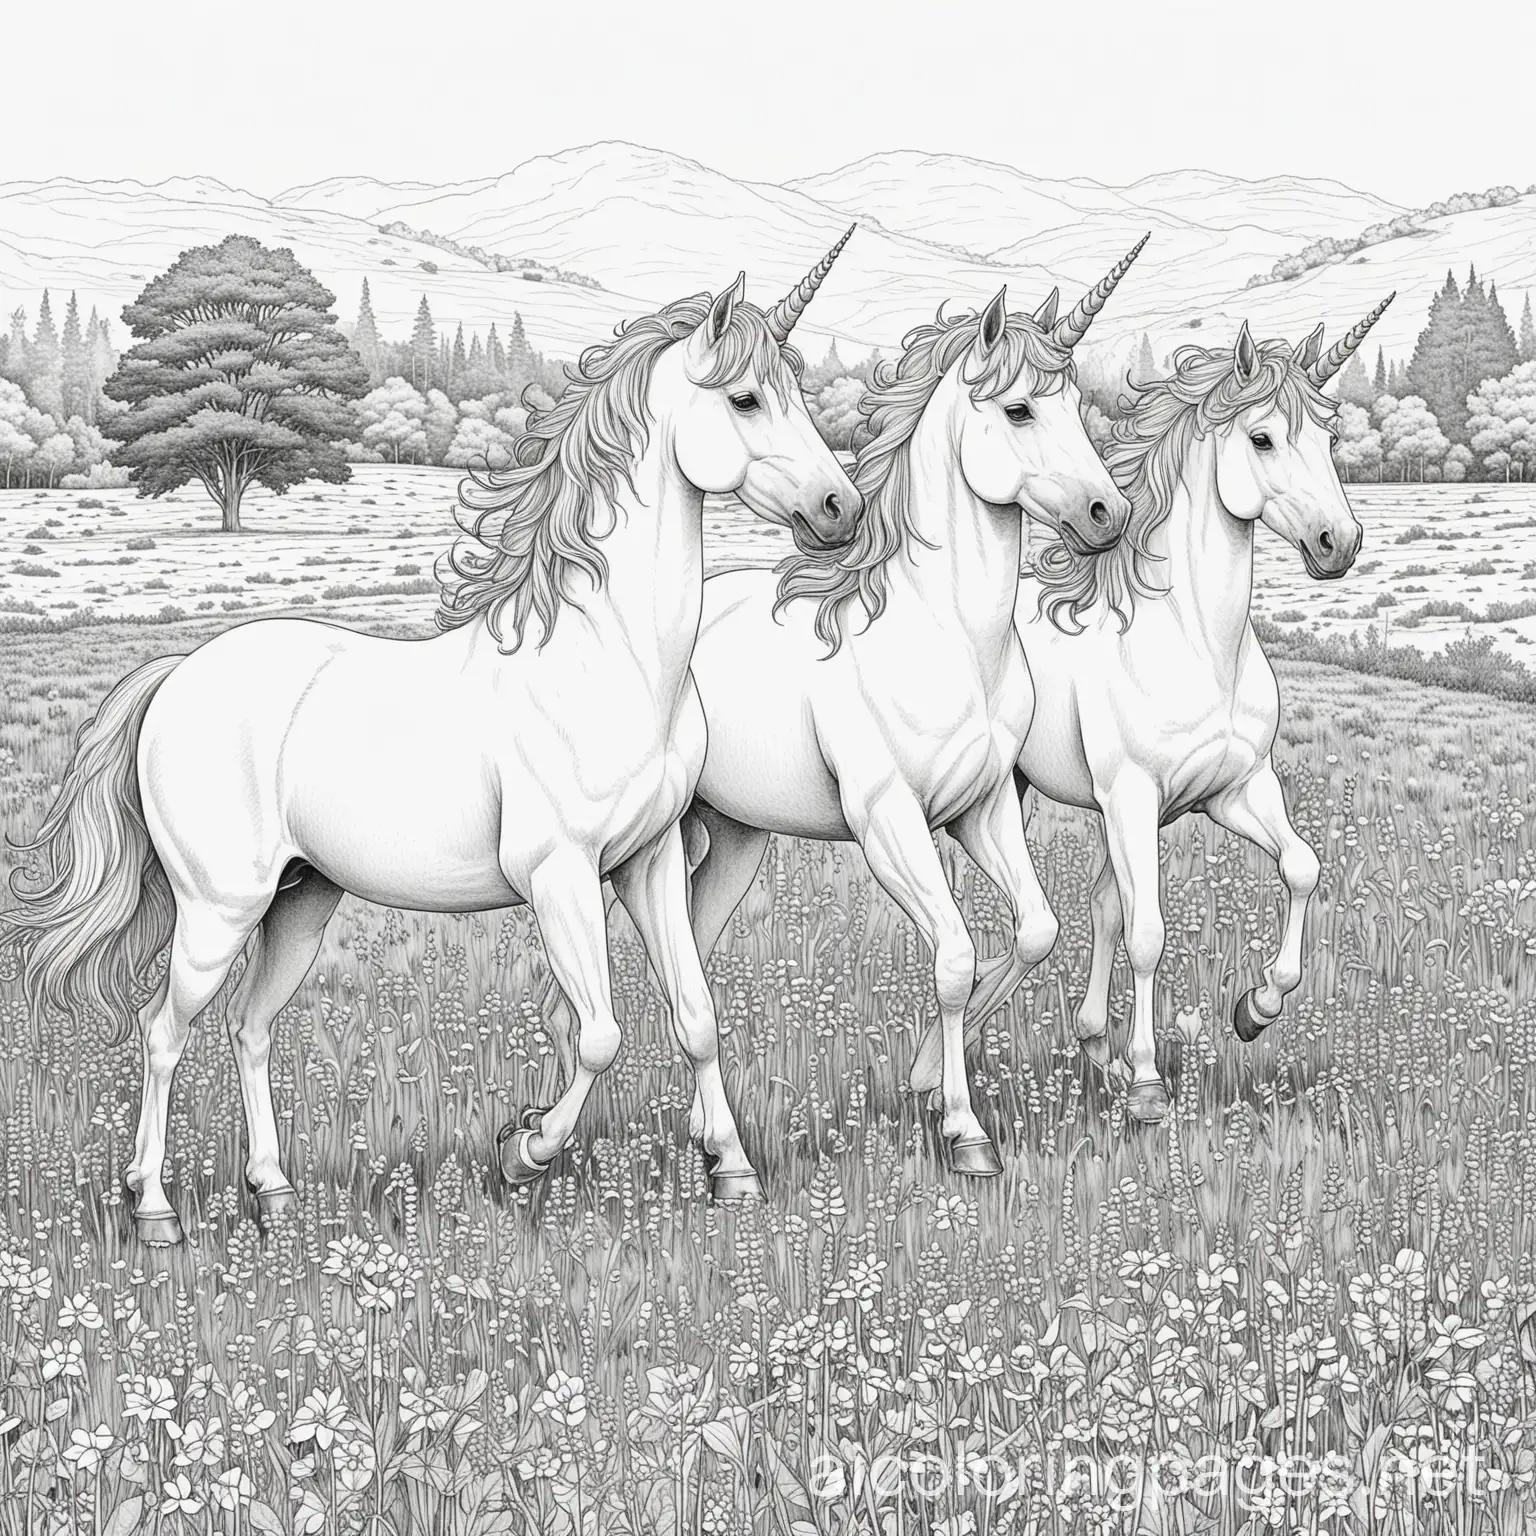 unicorns in a field, Coloring Page, black and white, line art, white background, Simplicity, Ample White Space. The background of the coloring page is plain white to make it easy for young children to color within the lines. The outlines of all the subjects are easy to distinguish, making it simple for kids to color without too much difficulty